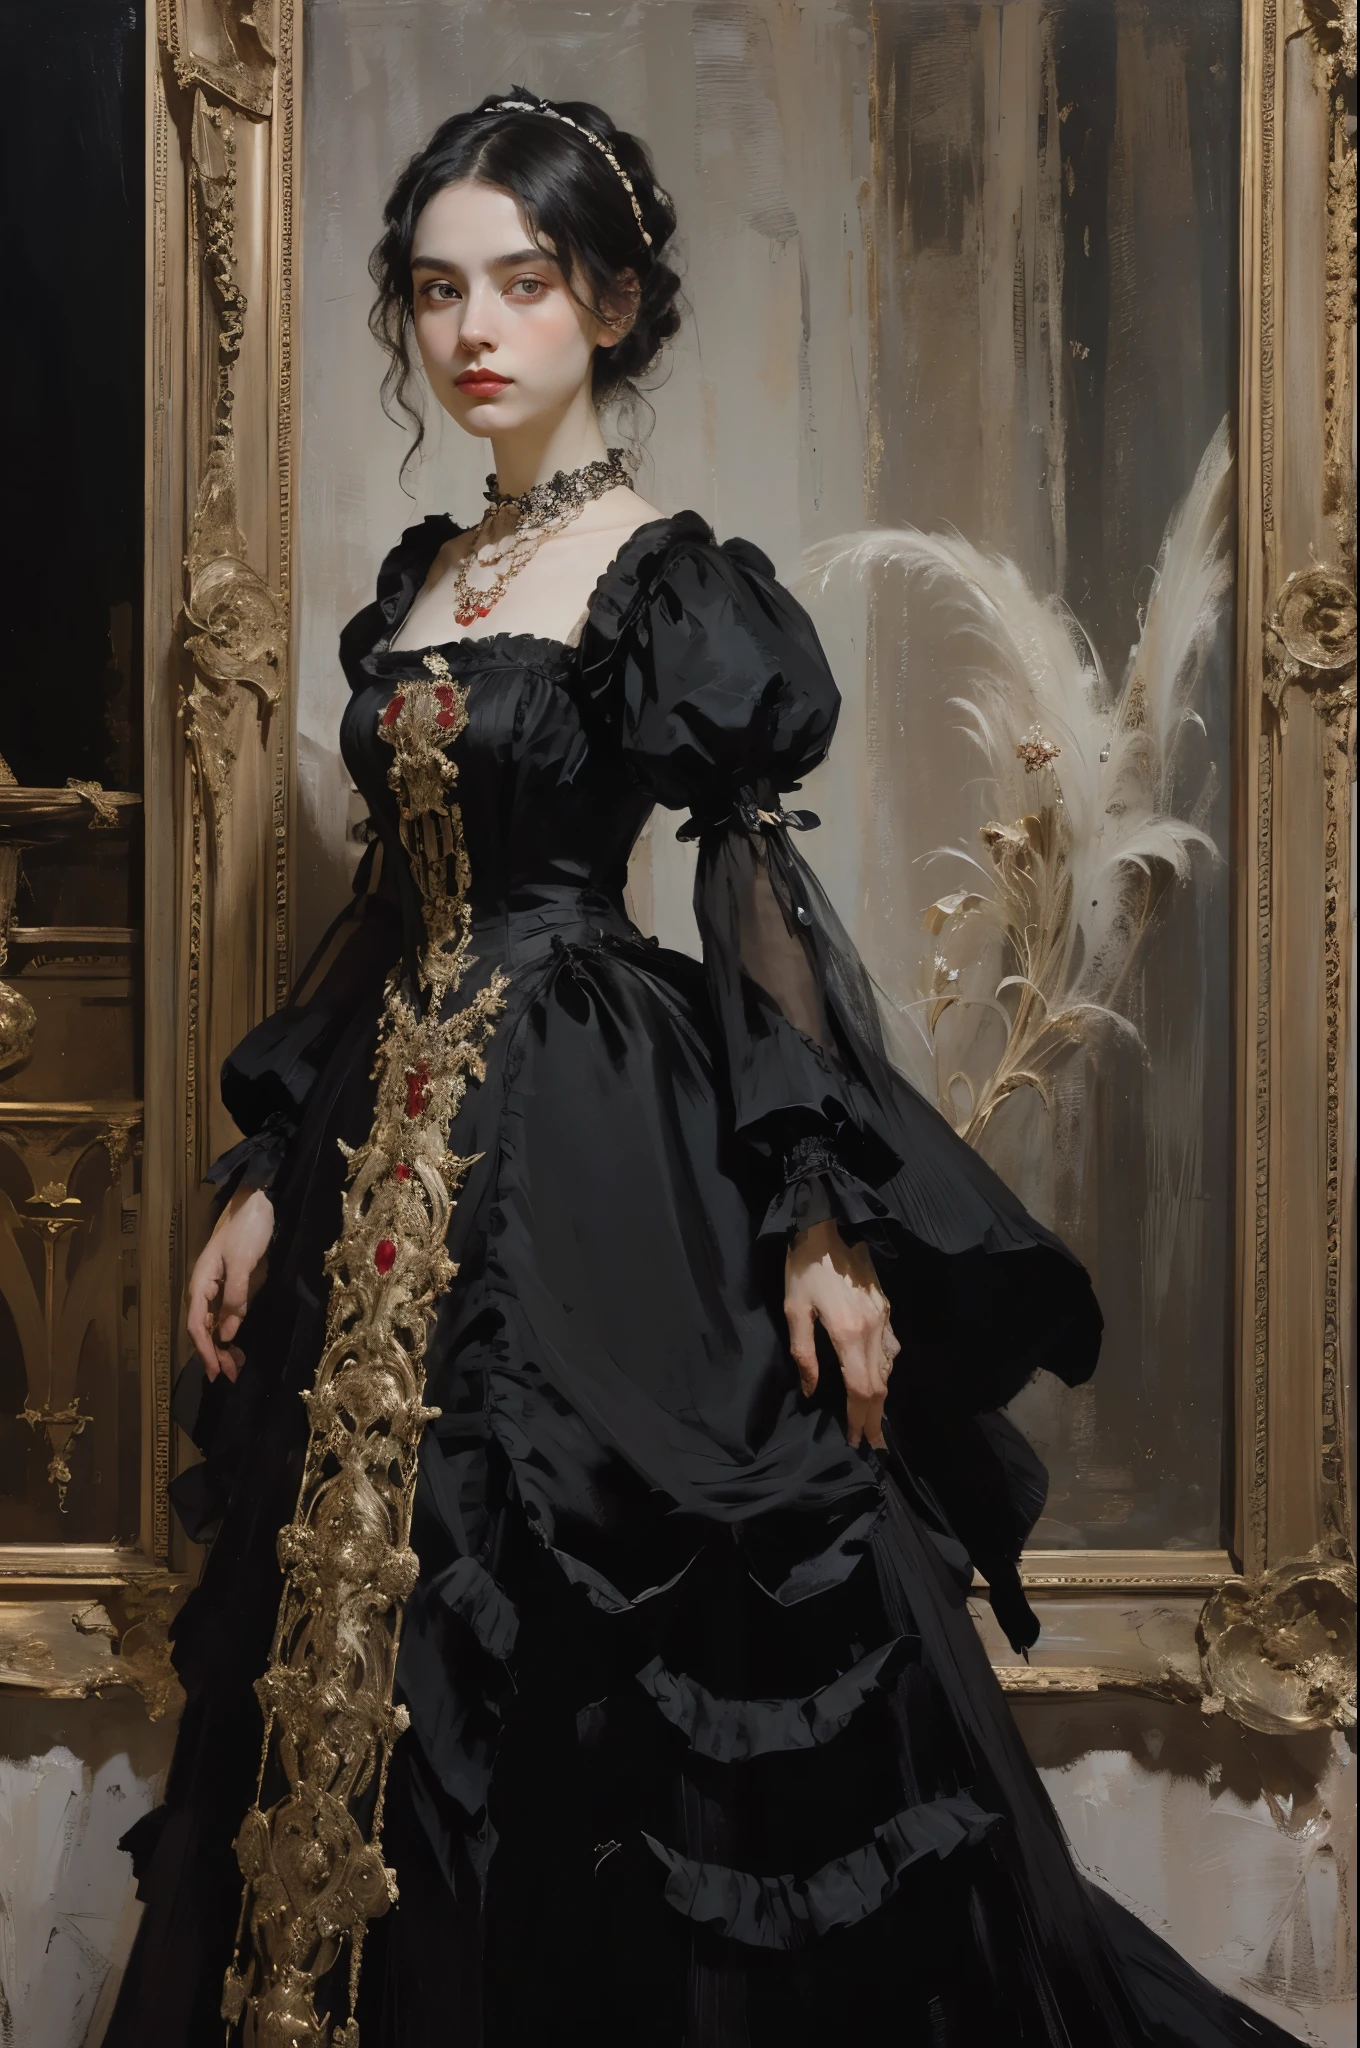 classical painting, ((PORTRAIT: 1.3)), a girl in a black dress, a formal dress of the Victorian style, (Victorian evening dress: 1.3), the dress has a stand-up collar, a young girl 25 years old, pale skin, slender, monochrome image with accent color, red ruby necklace,